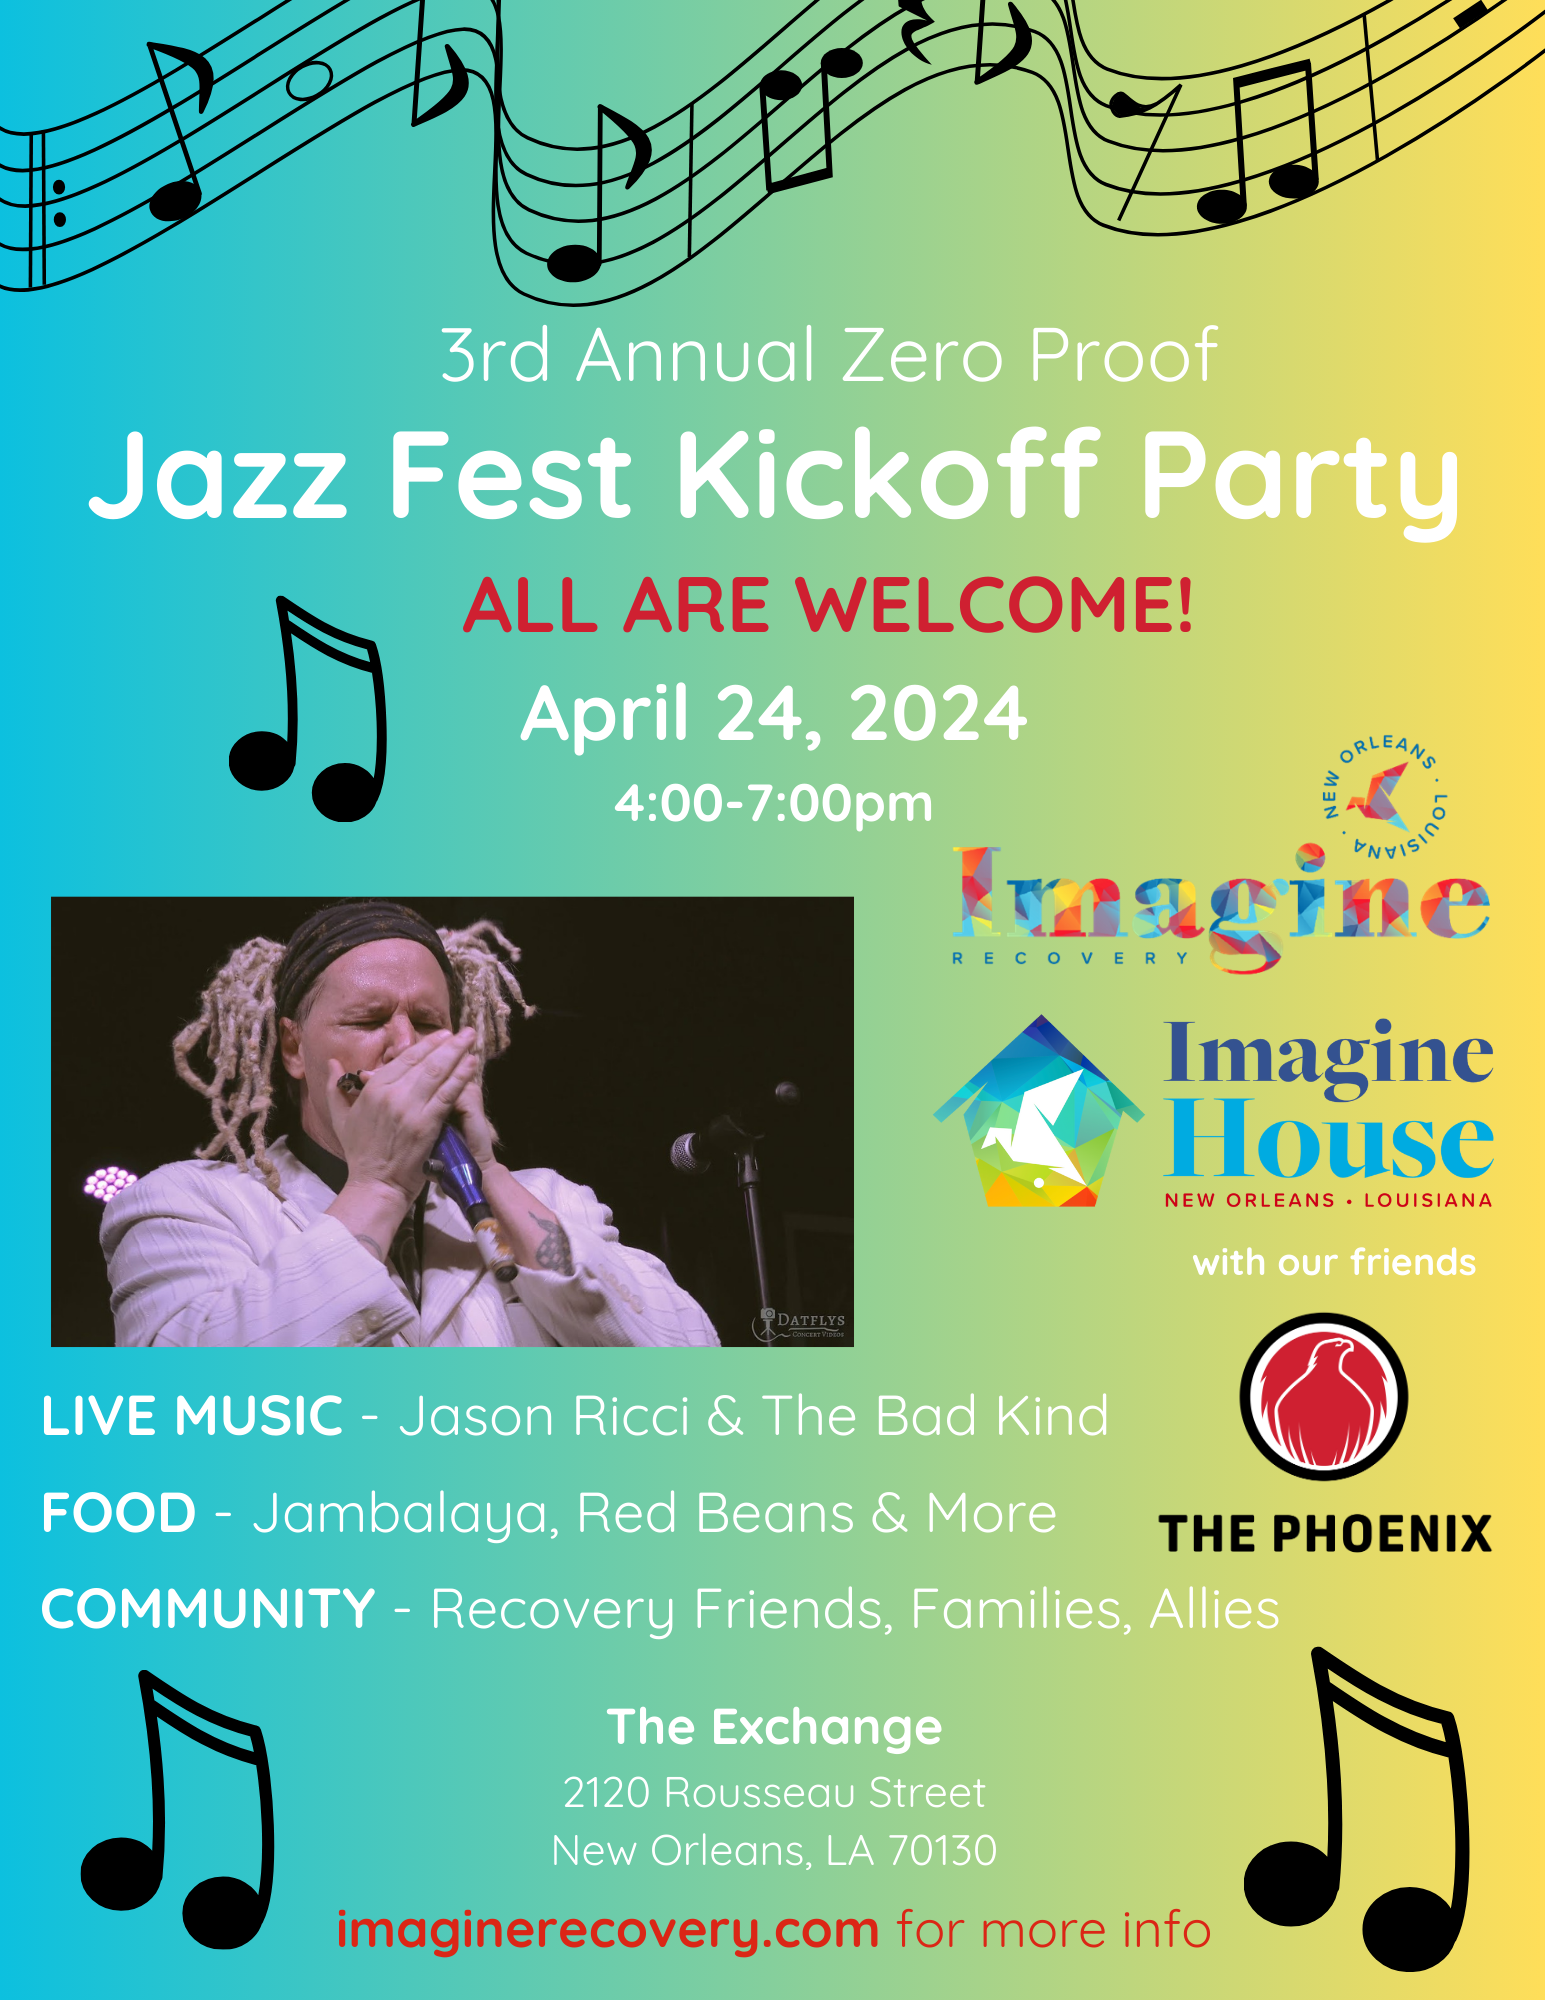 3rd Annual Zero-Proof Jazz Fest Kickoff Party ORLEANS w "NUISiT Imagine RECOVERY Imagine House NEW ORLEANS • LOUISIANA Having Fun in Recovery! Music - Jason Ricci & The Bad Kind Food - Jambalaya, Red Beans & more Community - Recovery Folks & Allies April 24th > 4:00-7:00pm at THE EXCHANGE 2120 Rousseau Street NOLA 70130